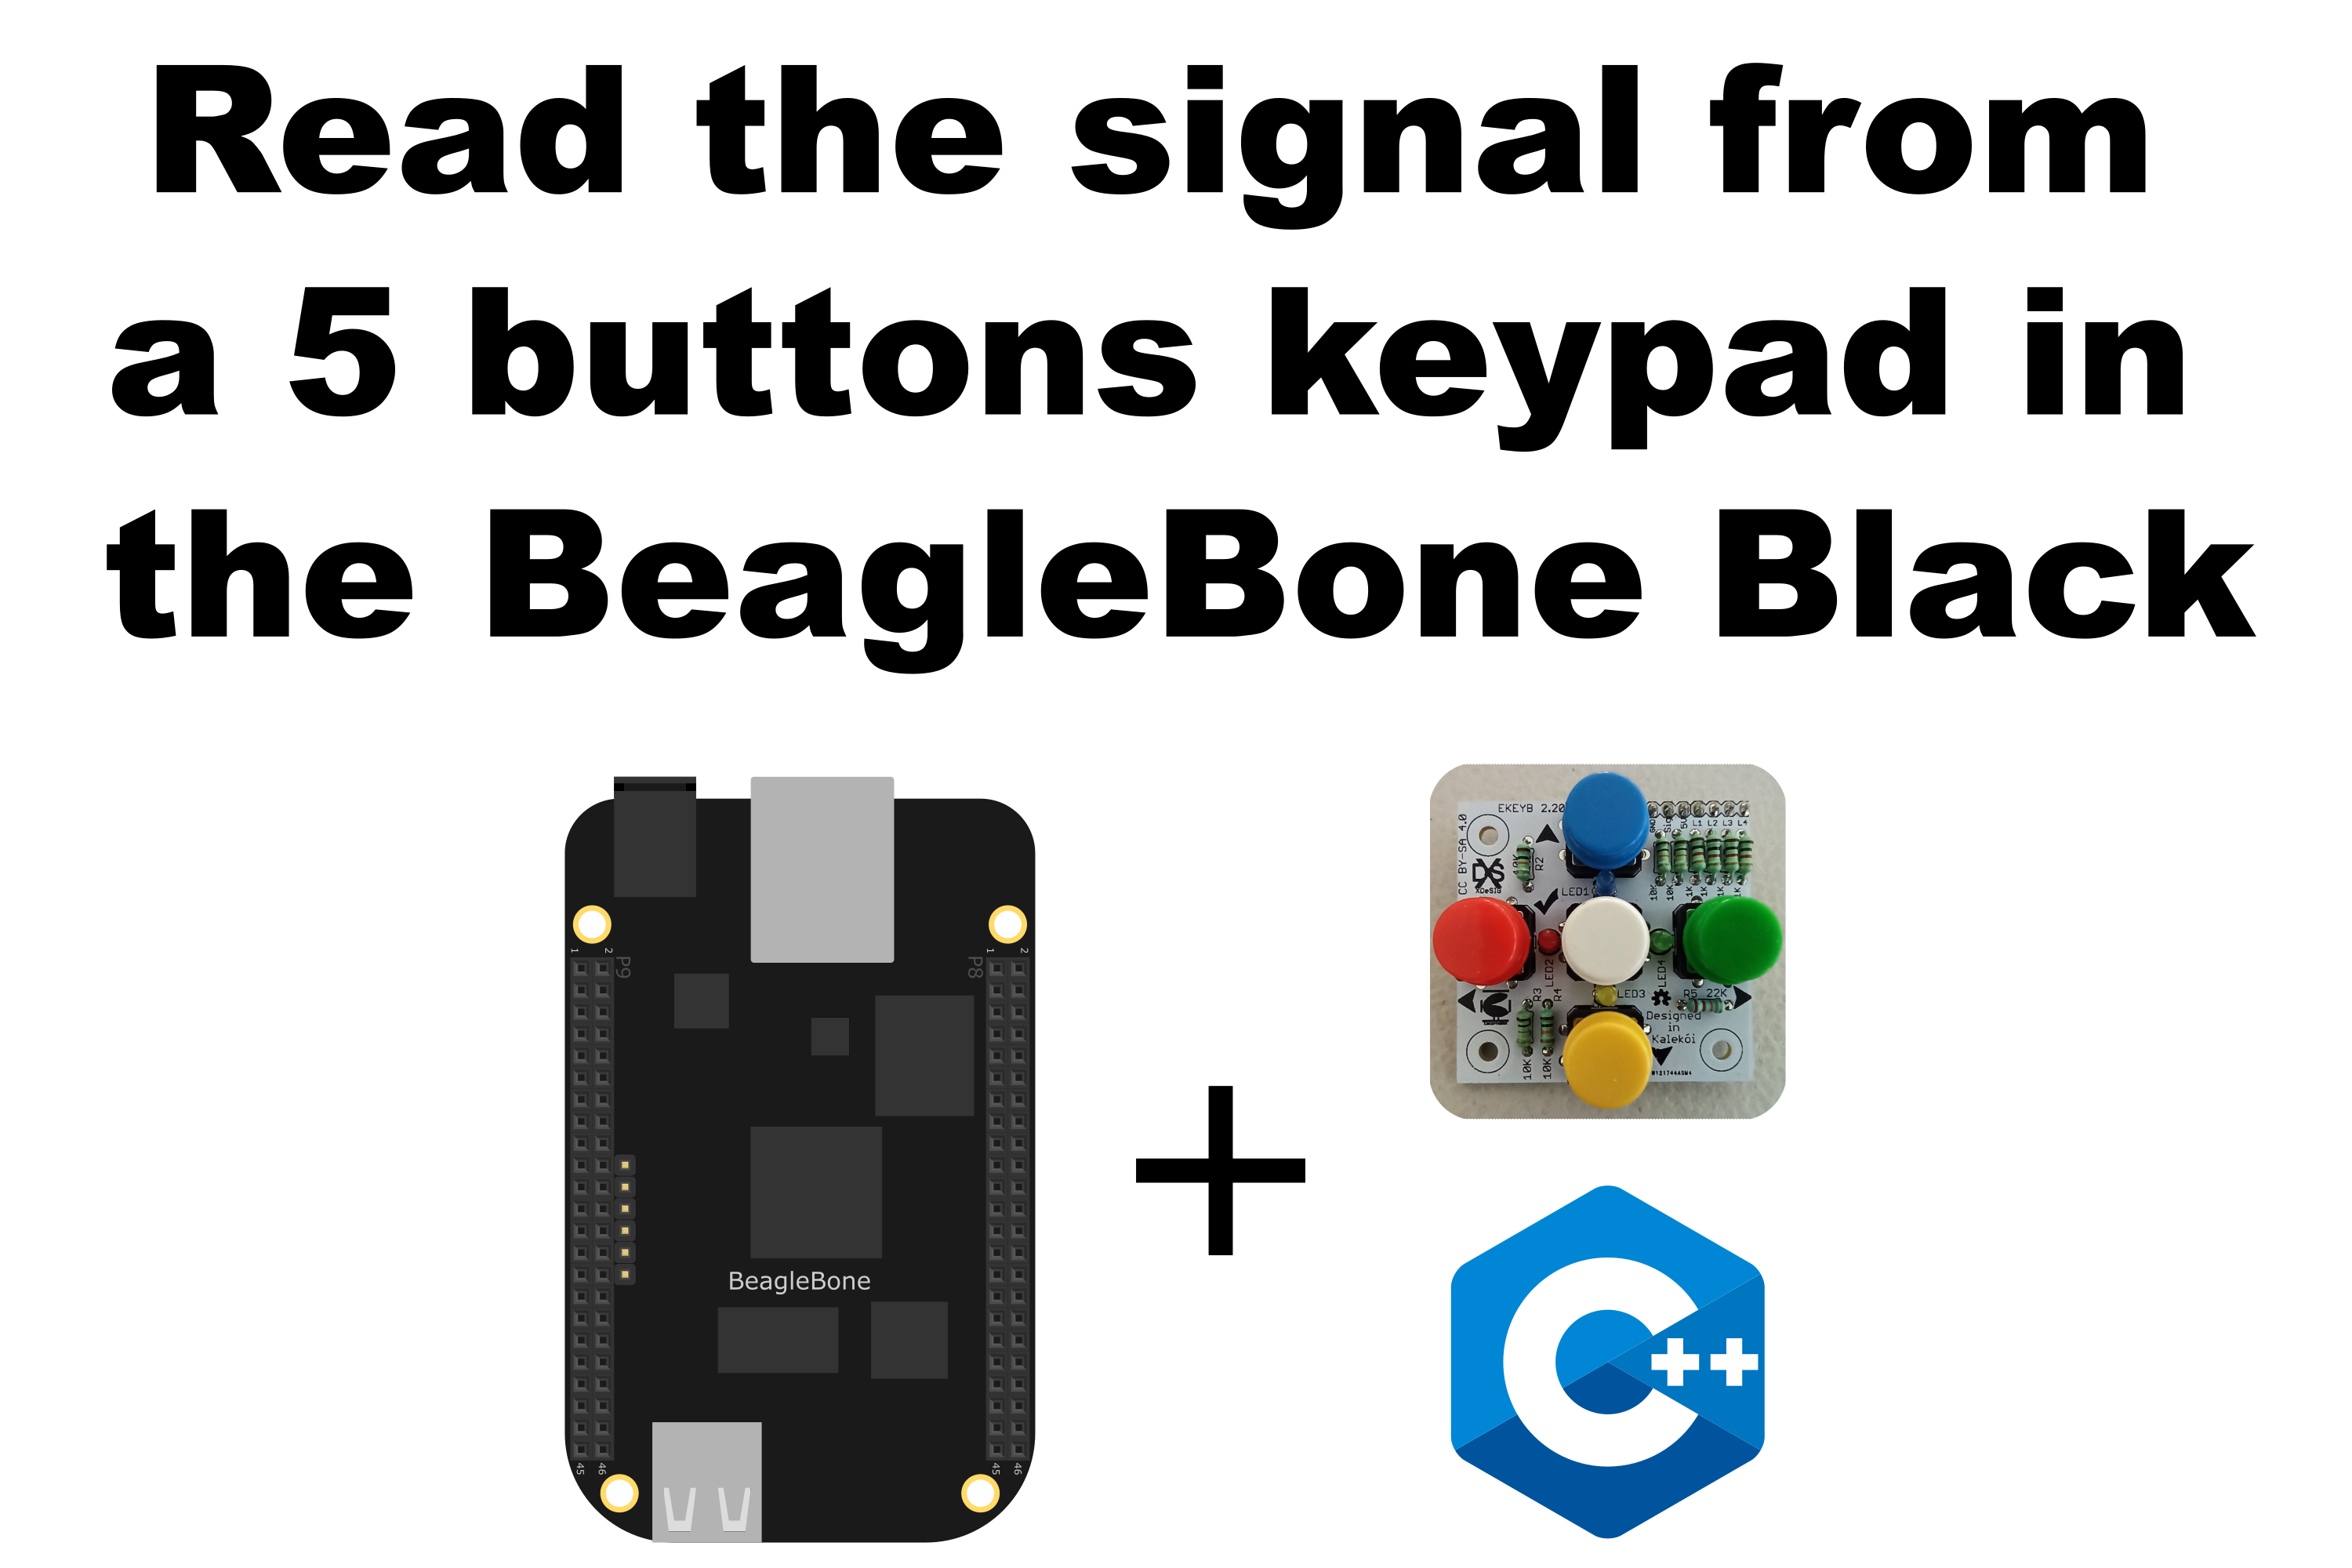 Read the signal from a 5 buttons keypad in the BeagleBone Black